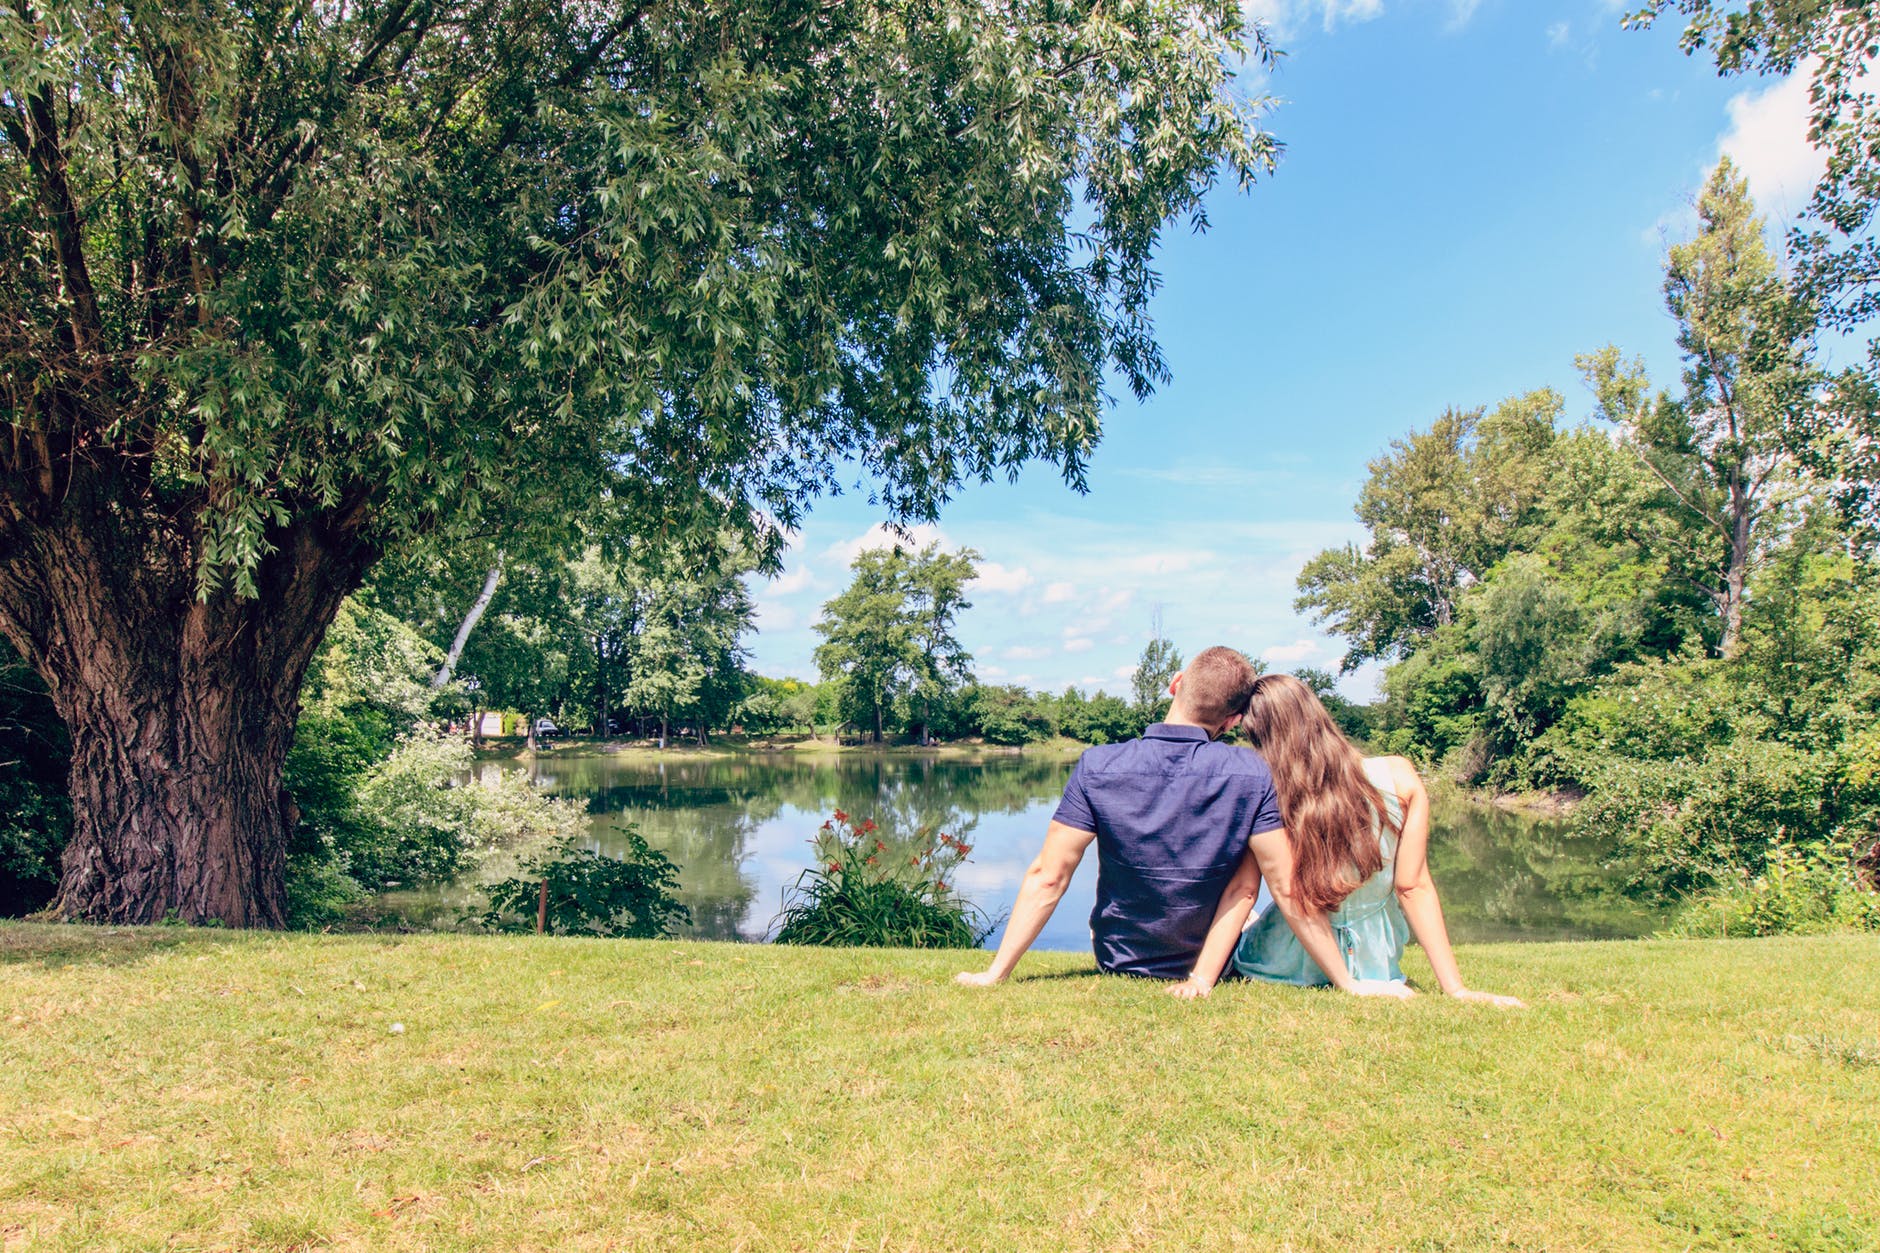 15 Undeniable Signs Of True Love In A Relationship